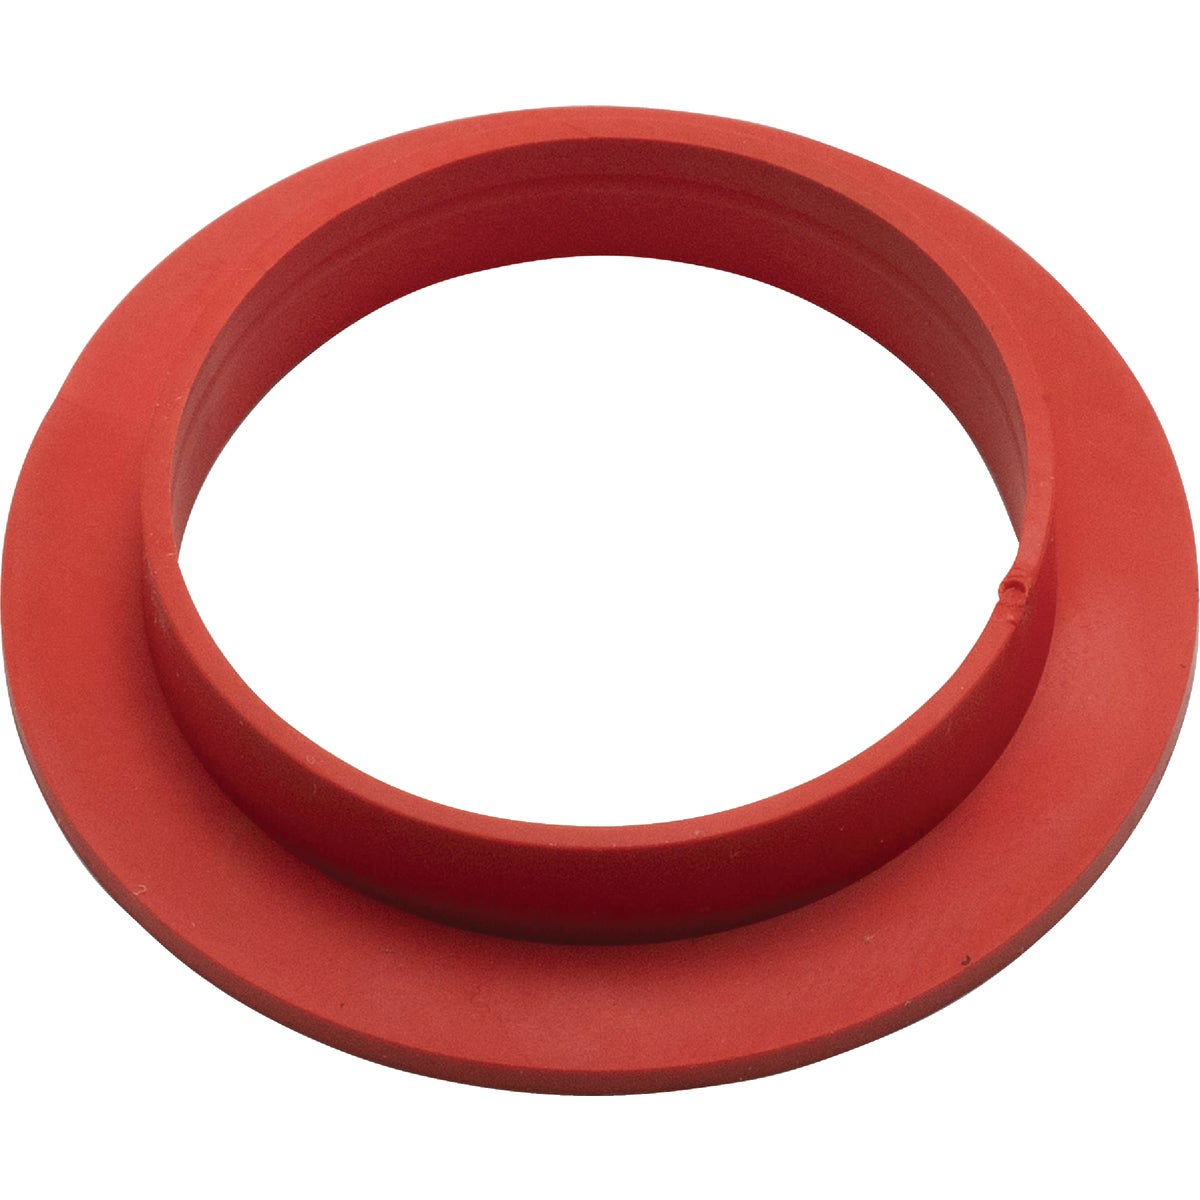 Item 448563, Poly tailpiece washers. 1-1/2".